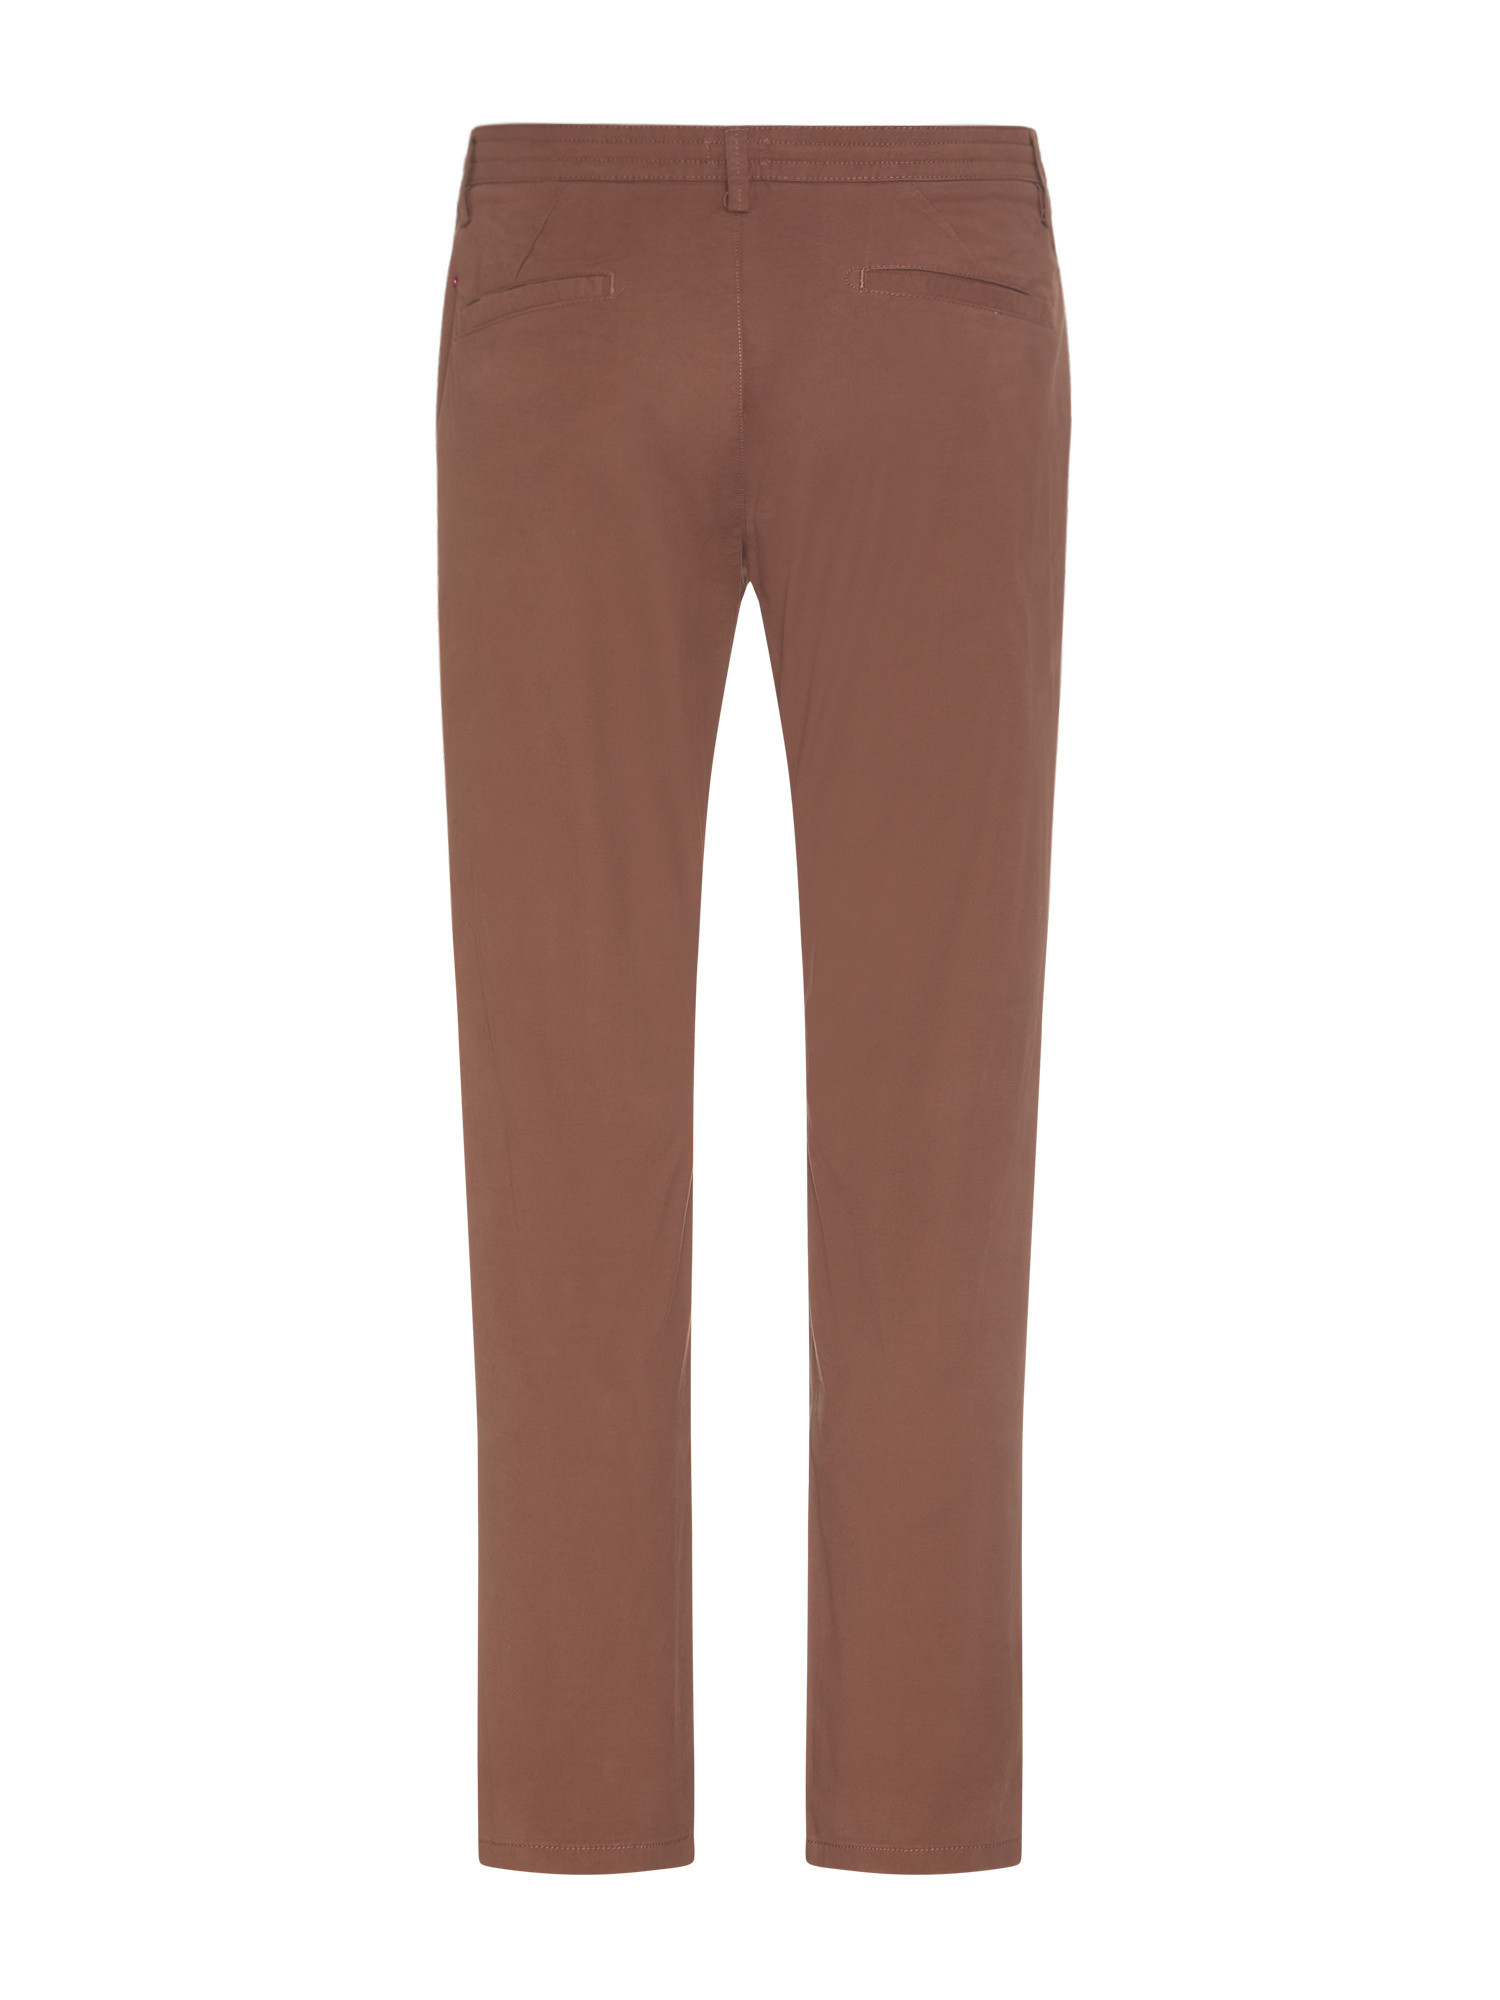 JCT - Slim fit chino jogger, Brown, large image number 1